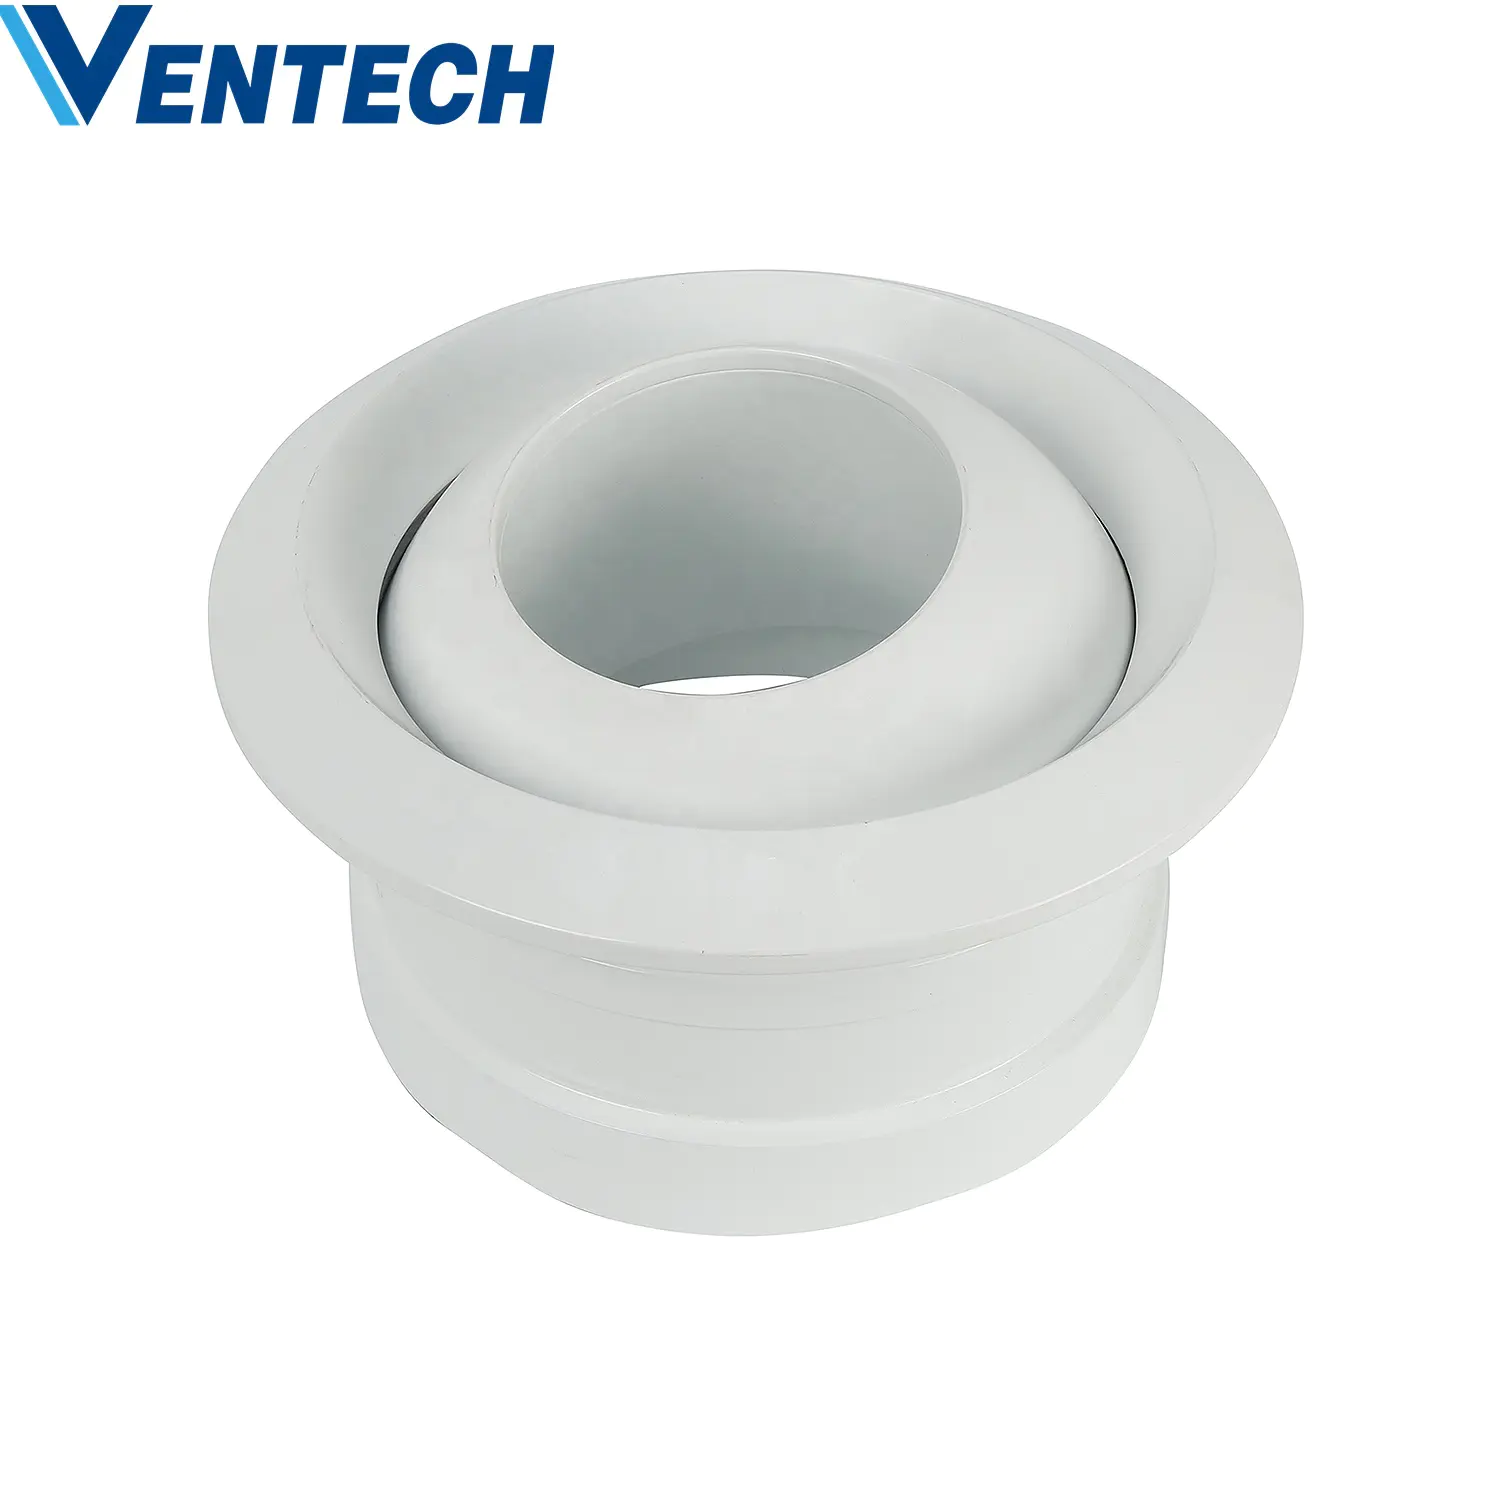 Free Sample Hvac air conditioner system supply round duct installation eye ball type jet nozzle diffuser